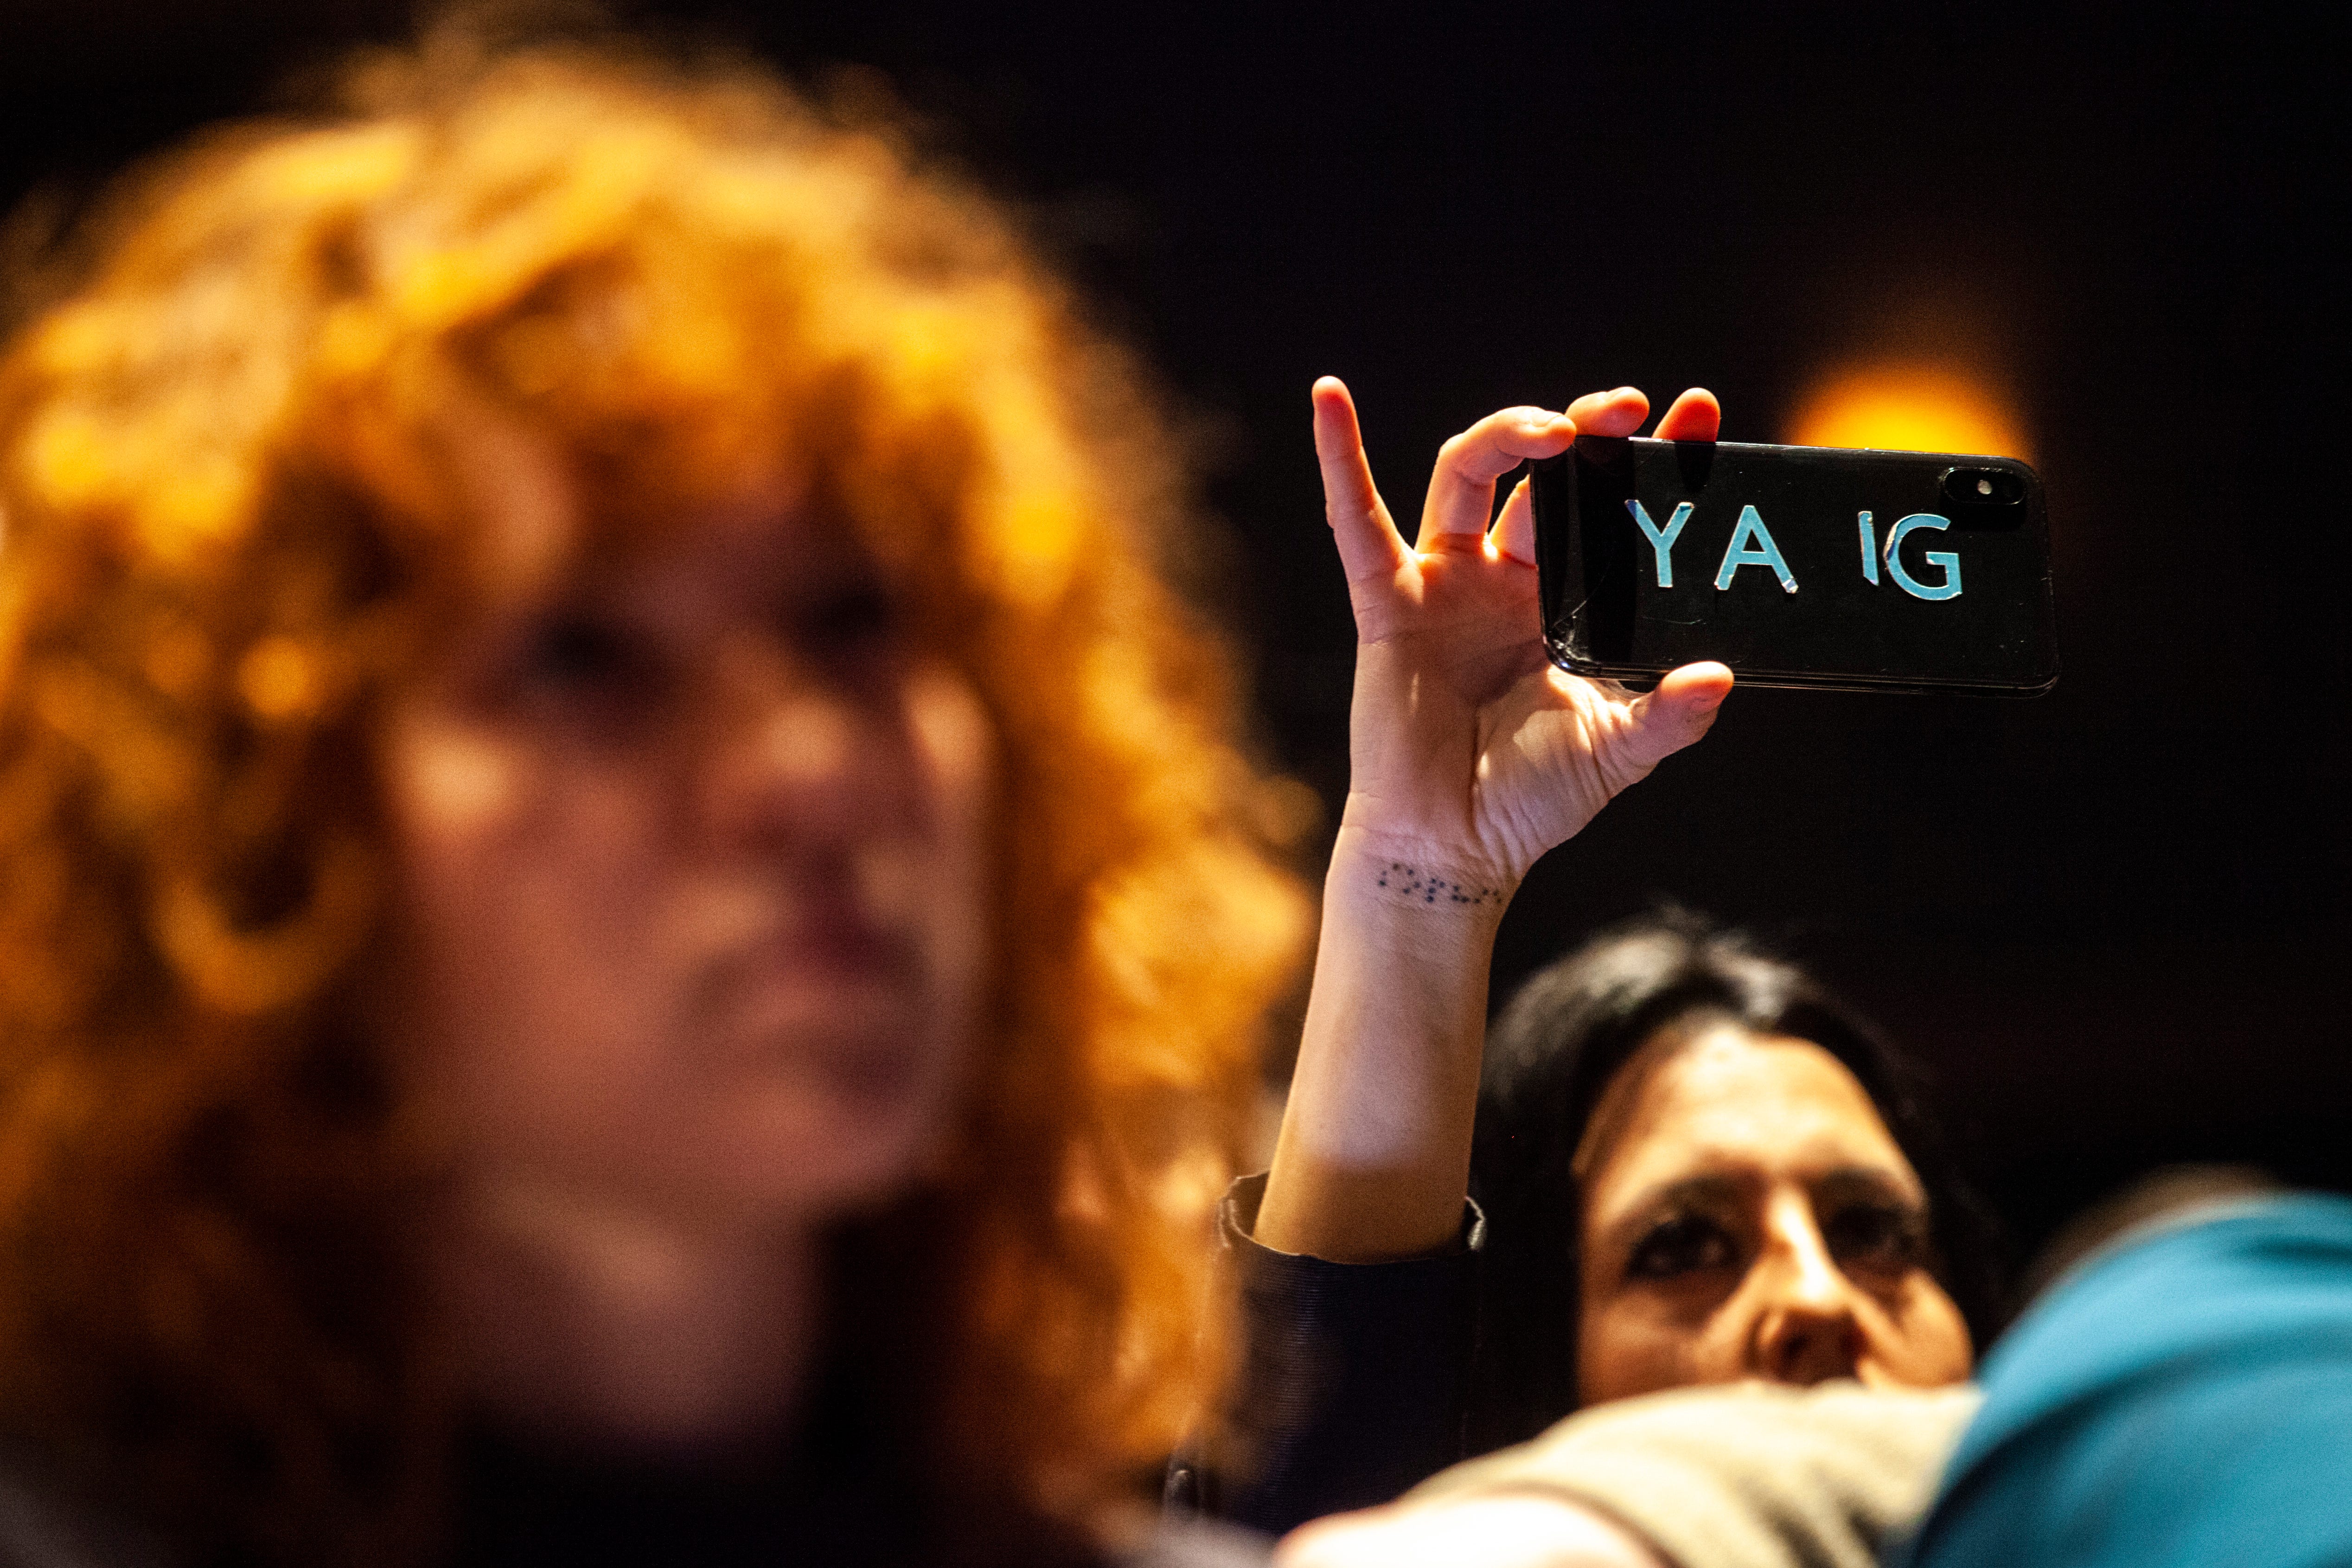 A supporter holds up a phone while Democratic presidential candidate Andrew Yang speaks during the "Women's Town Hall," Saturday, Jan. 18, 2020, at the Englert Theatre in Iowa City, Iowa.